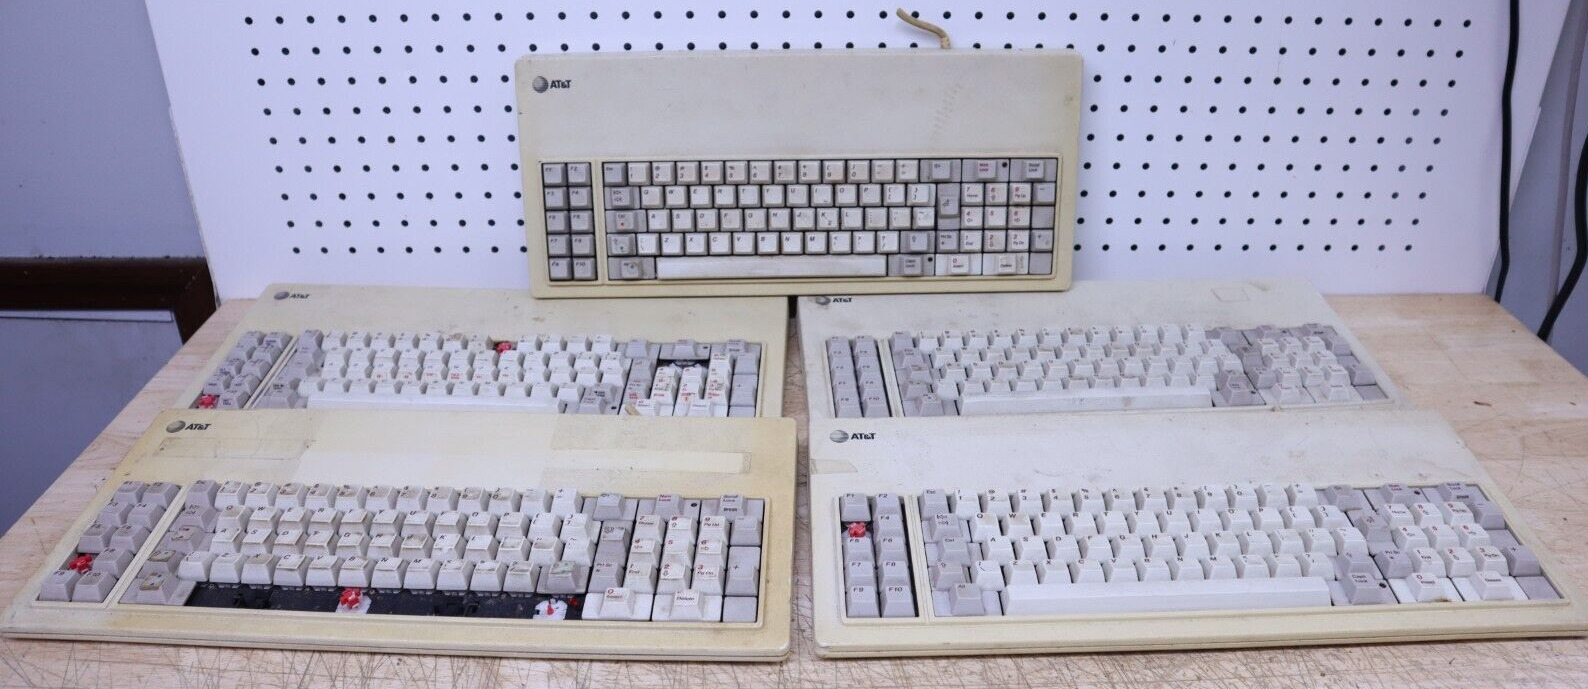 Rare Lot x5 Vintage AT&T KBD-301 Clicky Mechanical Keyboards Italy *Parts/Repair